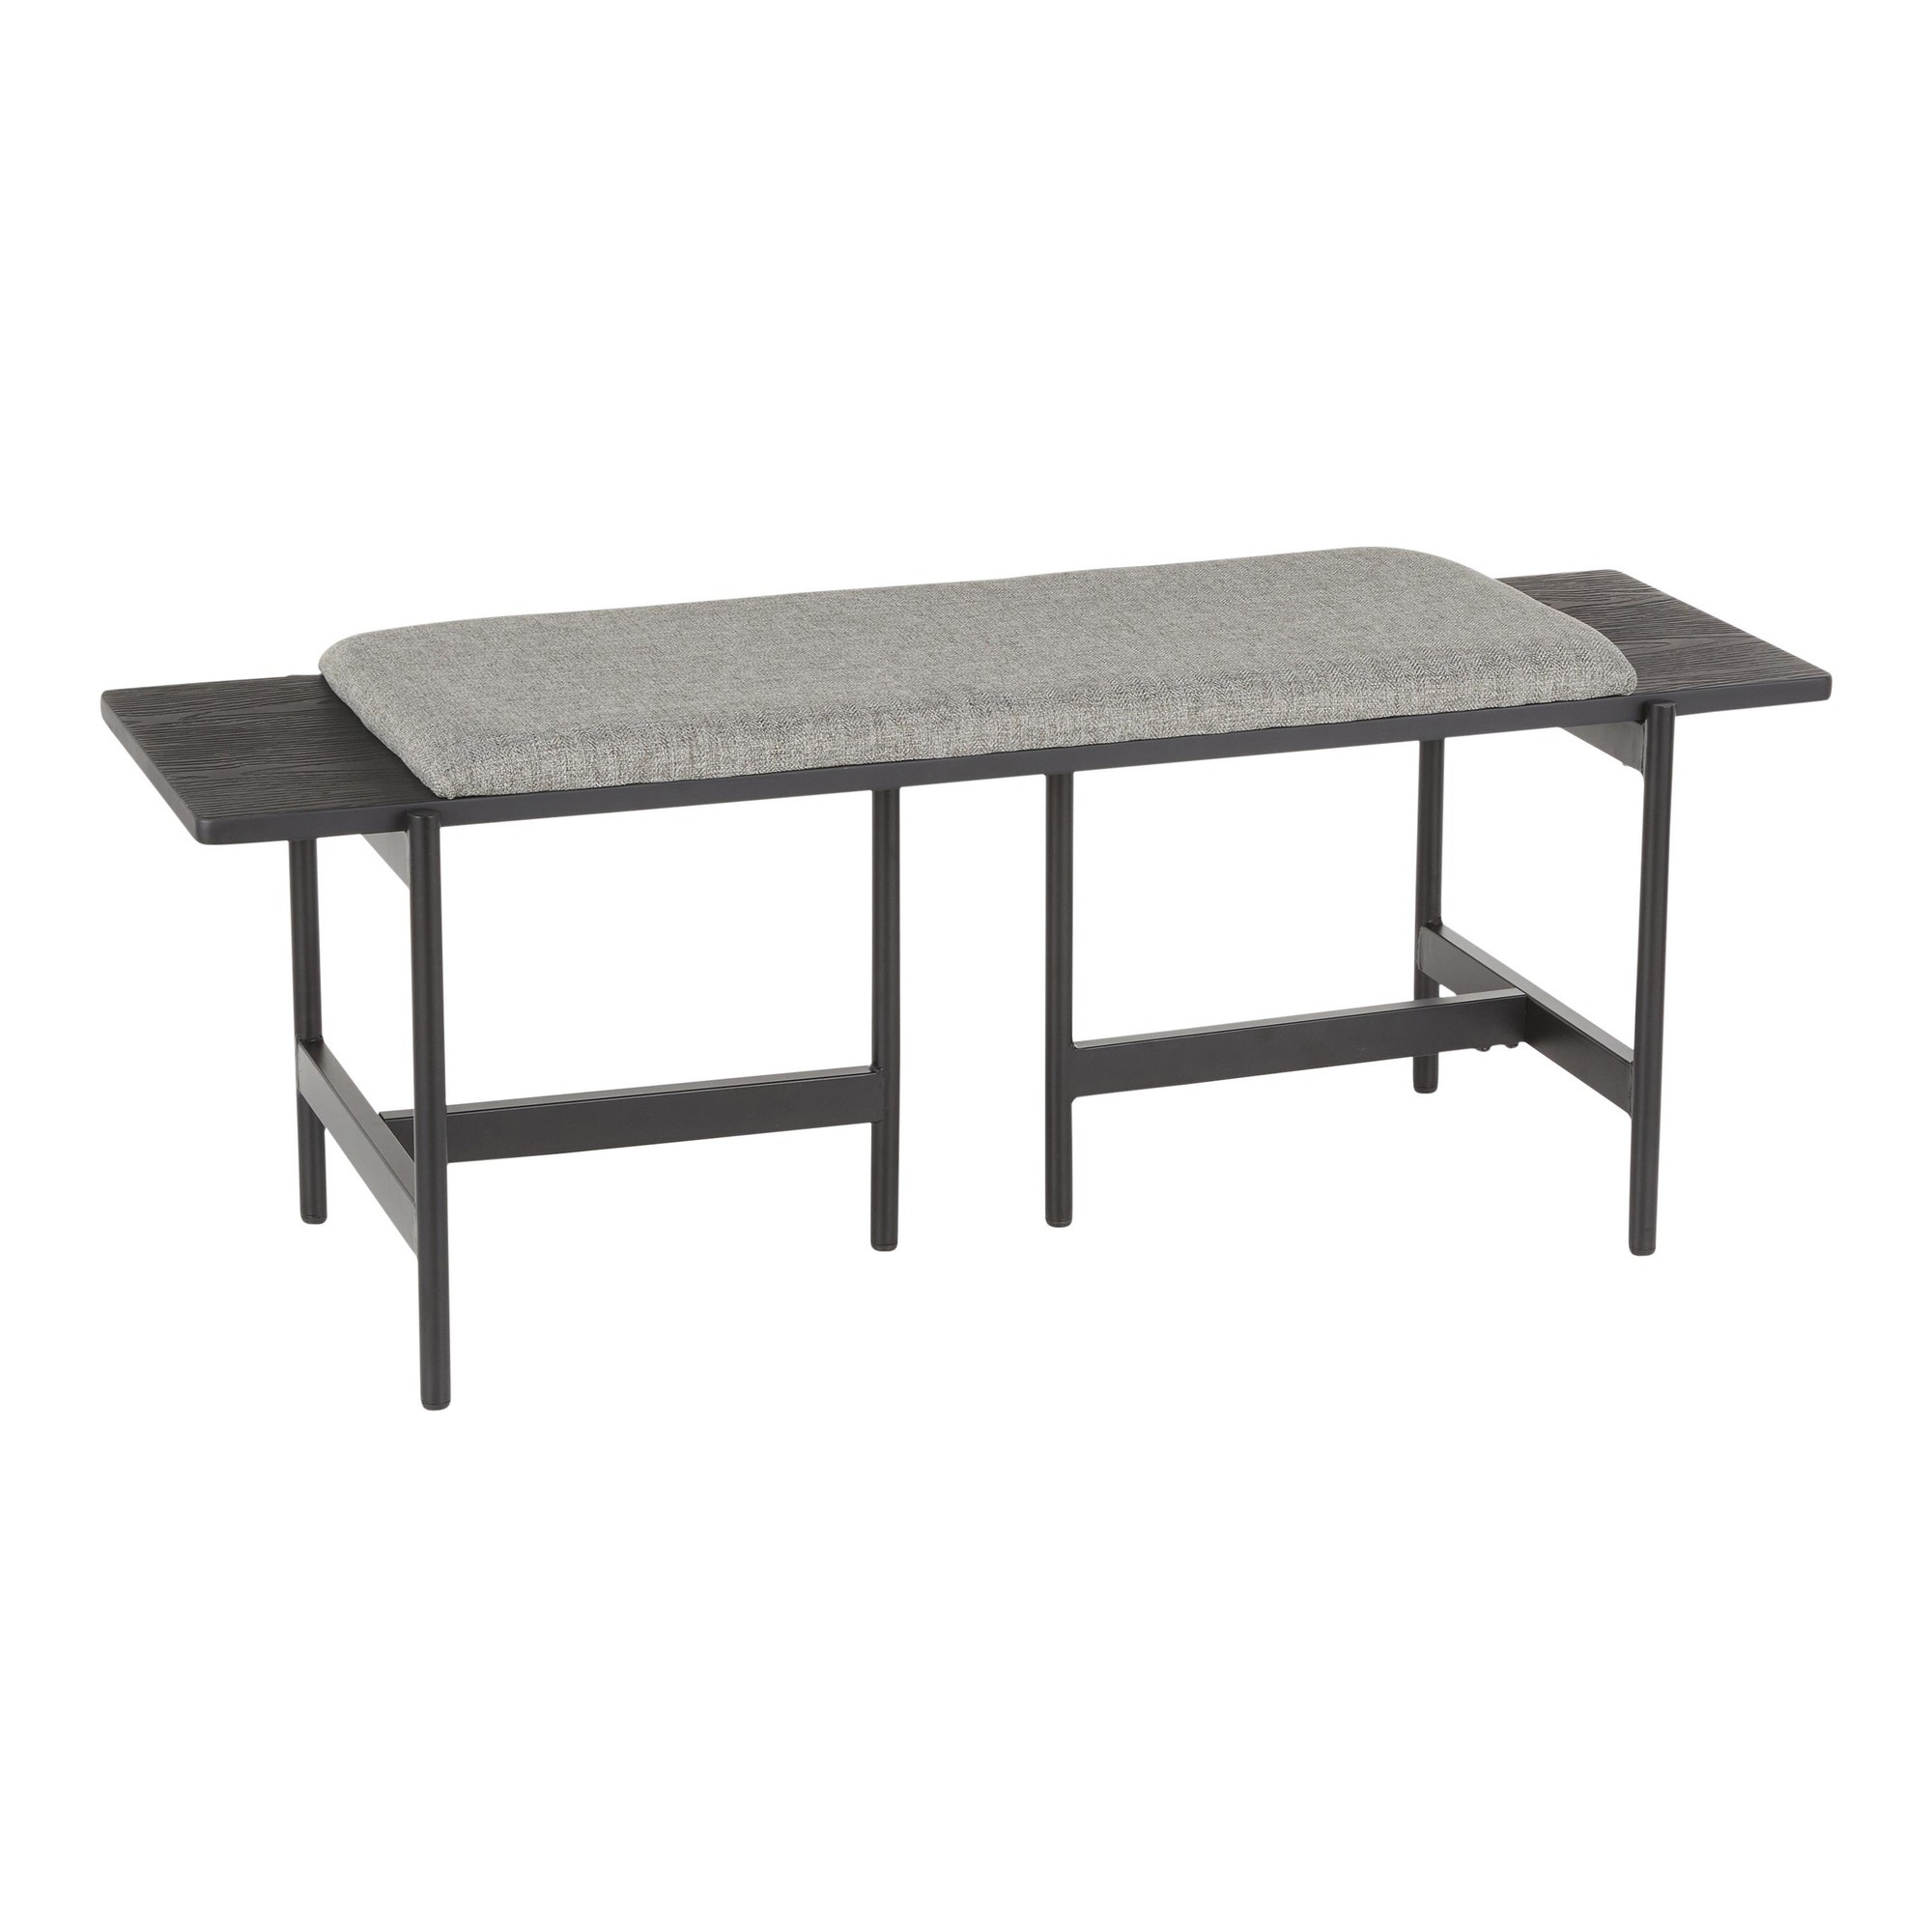 Chloe Contemporary Bench in Black Metal and Grey Fabric with Black Wood Accents by LumiSource - image 1 of 6